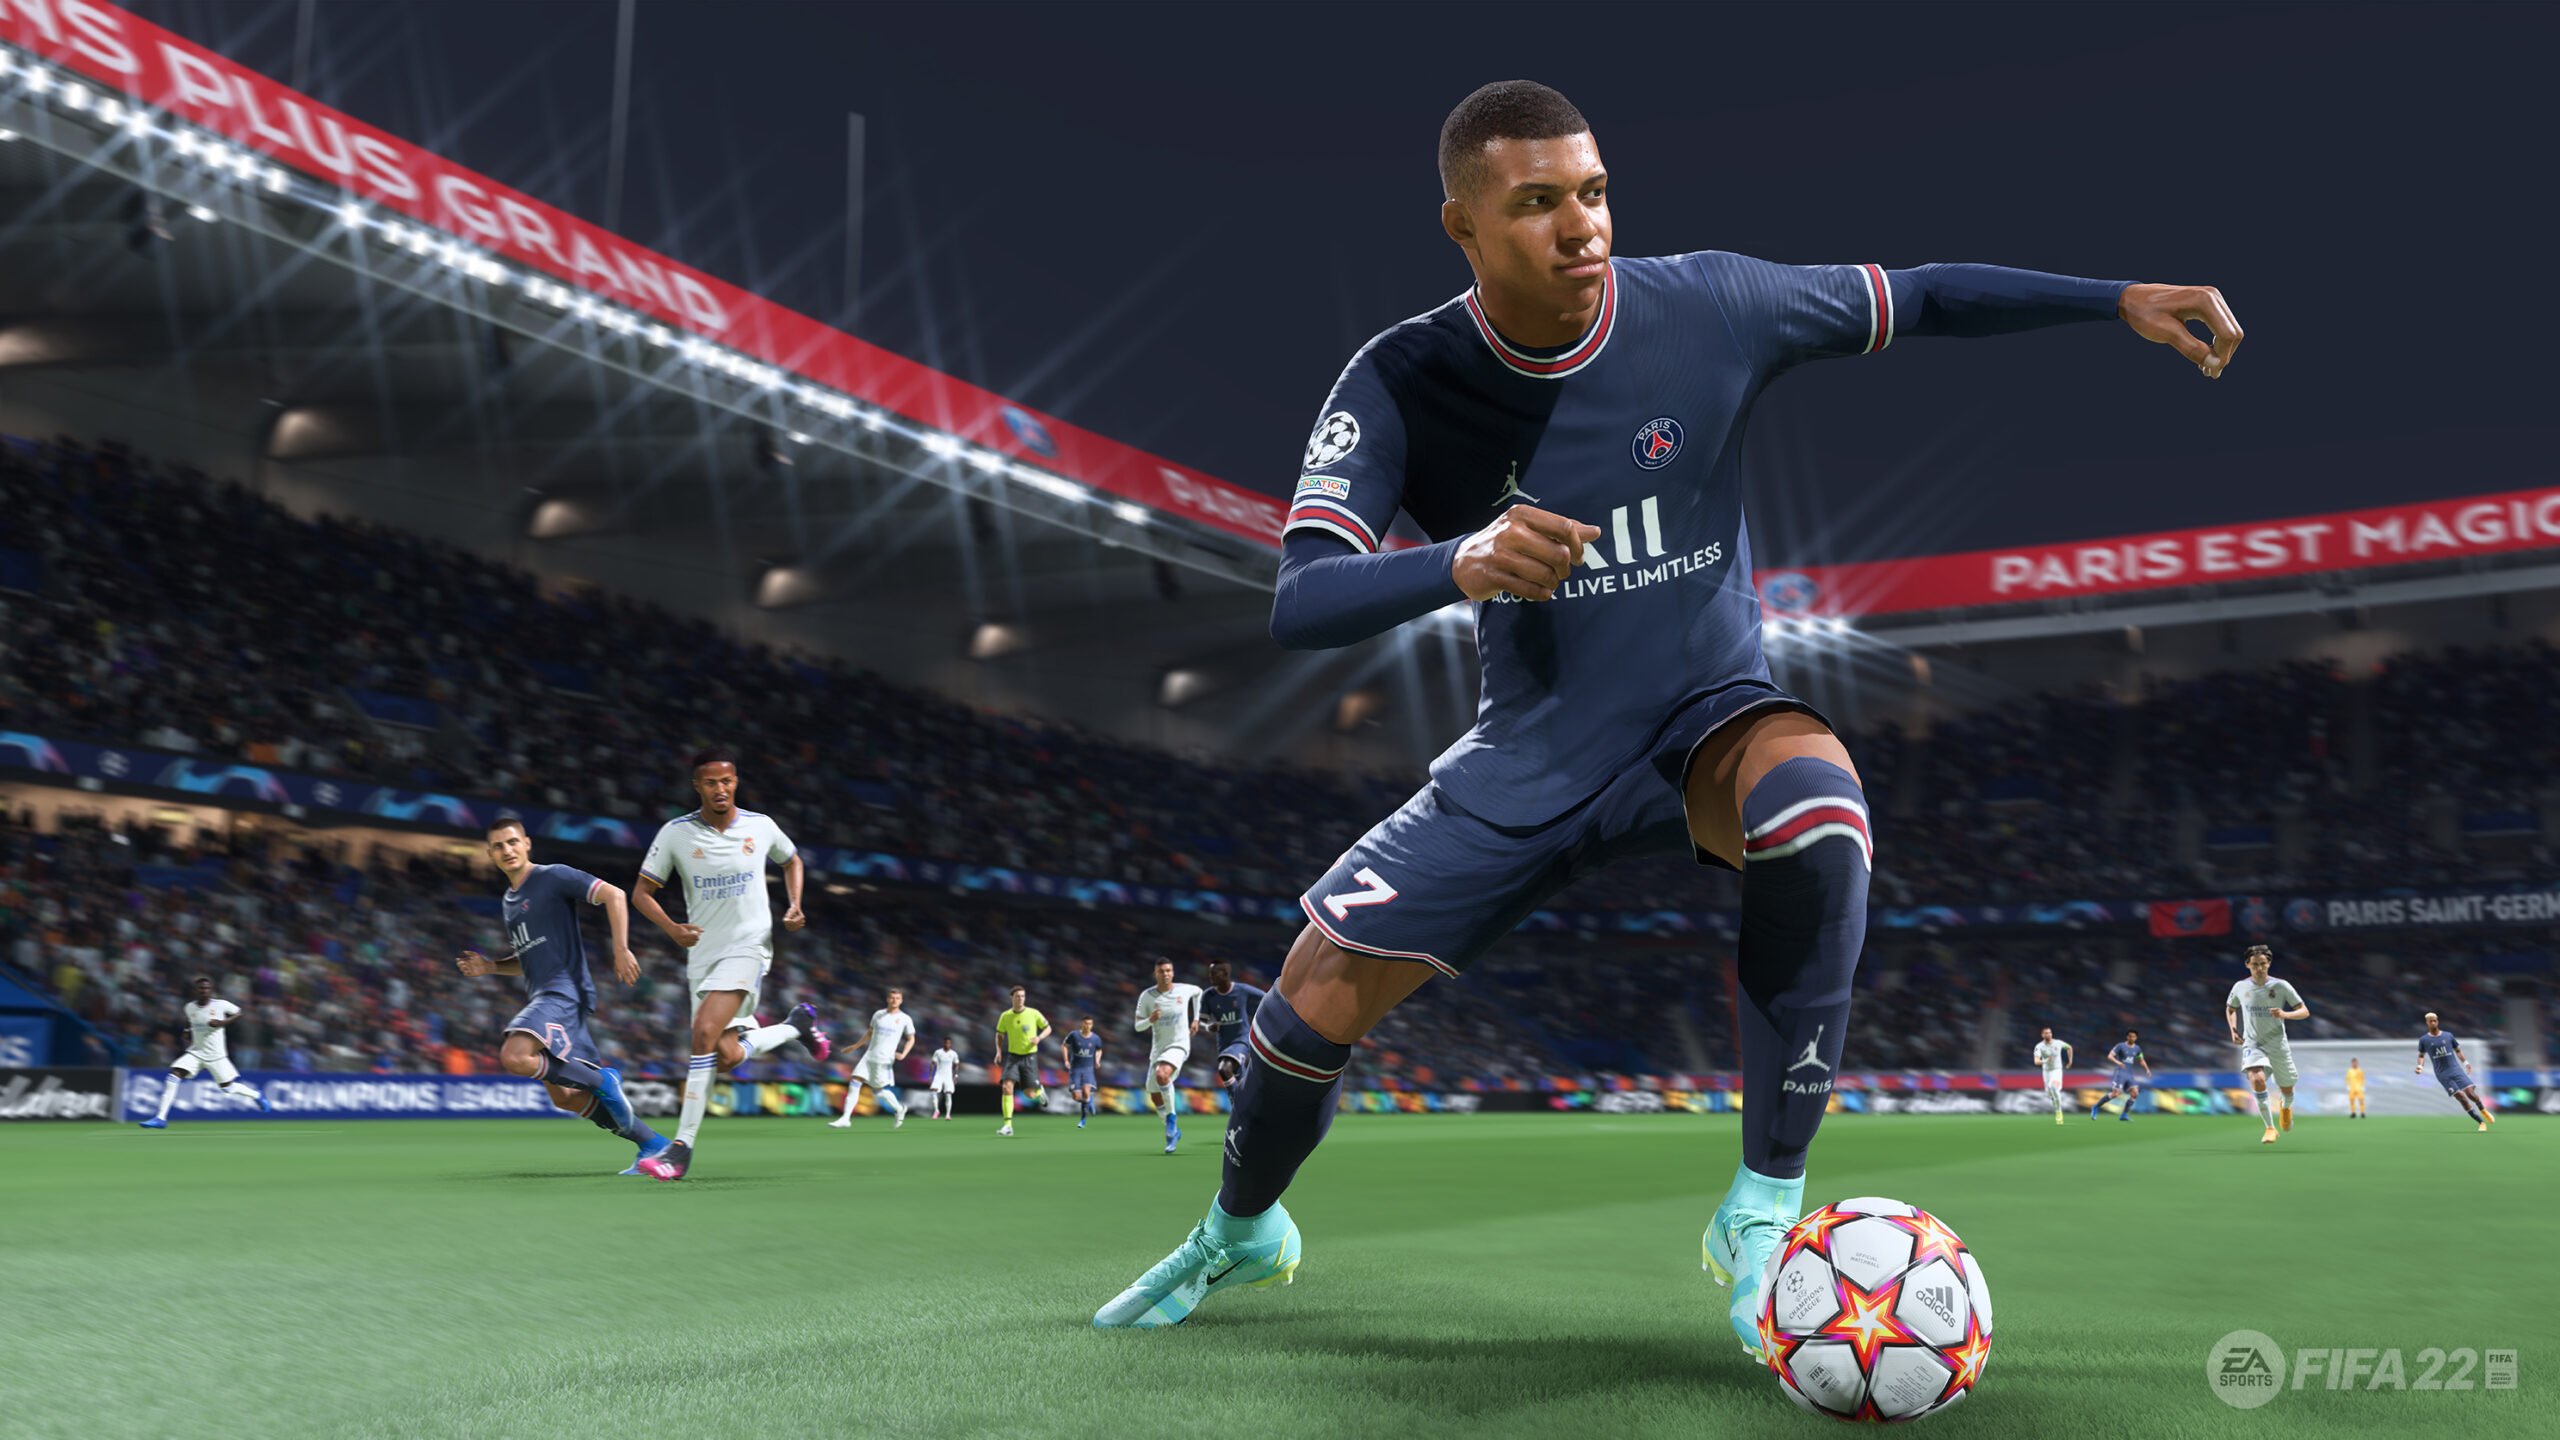 Electronic Arts is also pulling its games from sale in Russia and Belarus